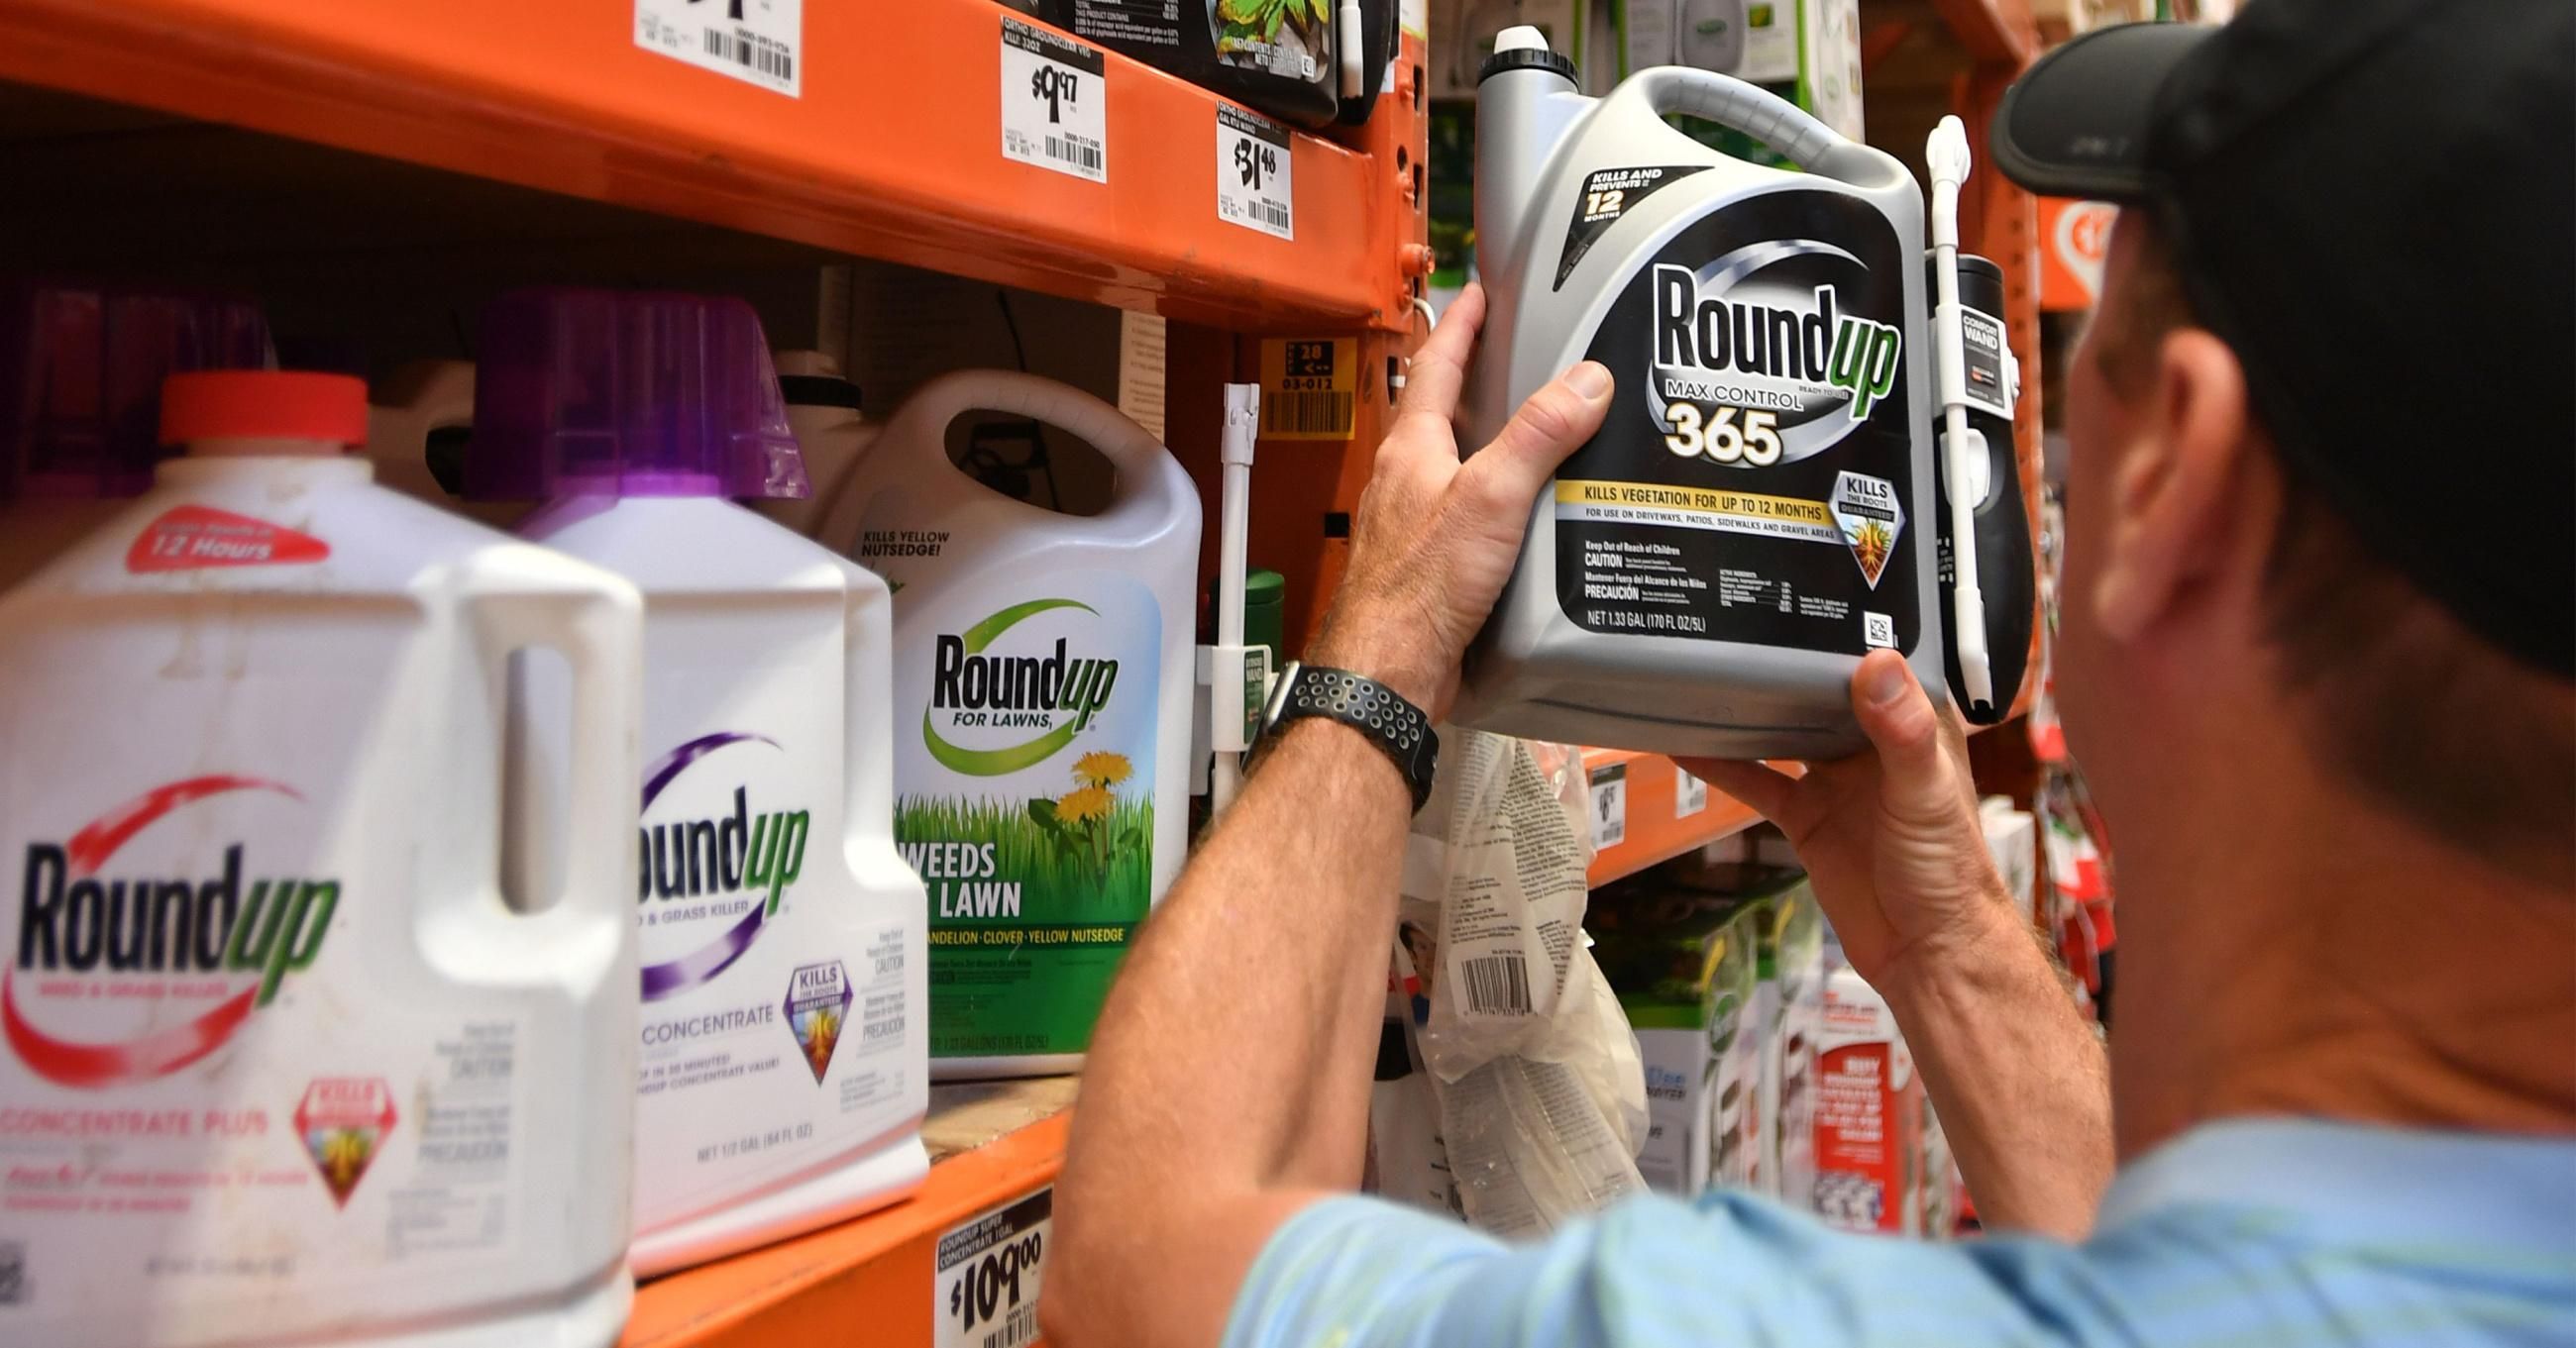 A customer shops for Roundup weedkiller at a store in San Rafael, California on July 9, 2018. (Photo: Josh Edelson/AFP via Getty Images)